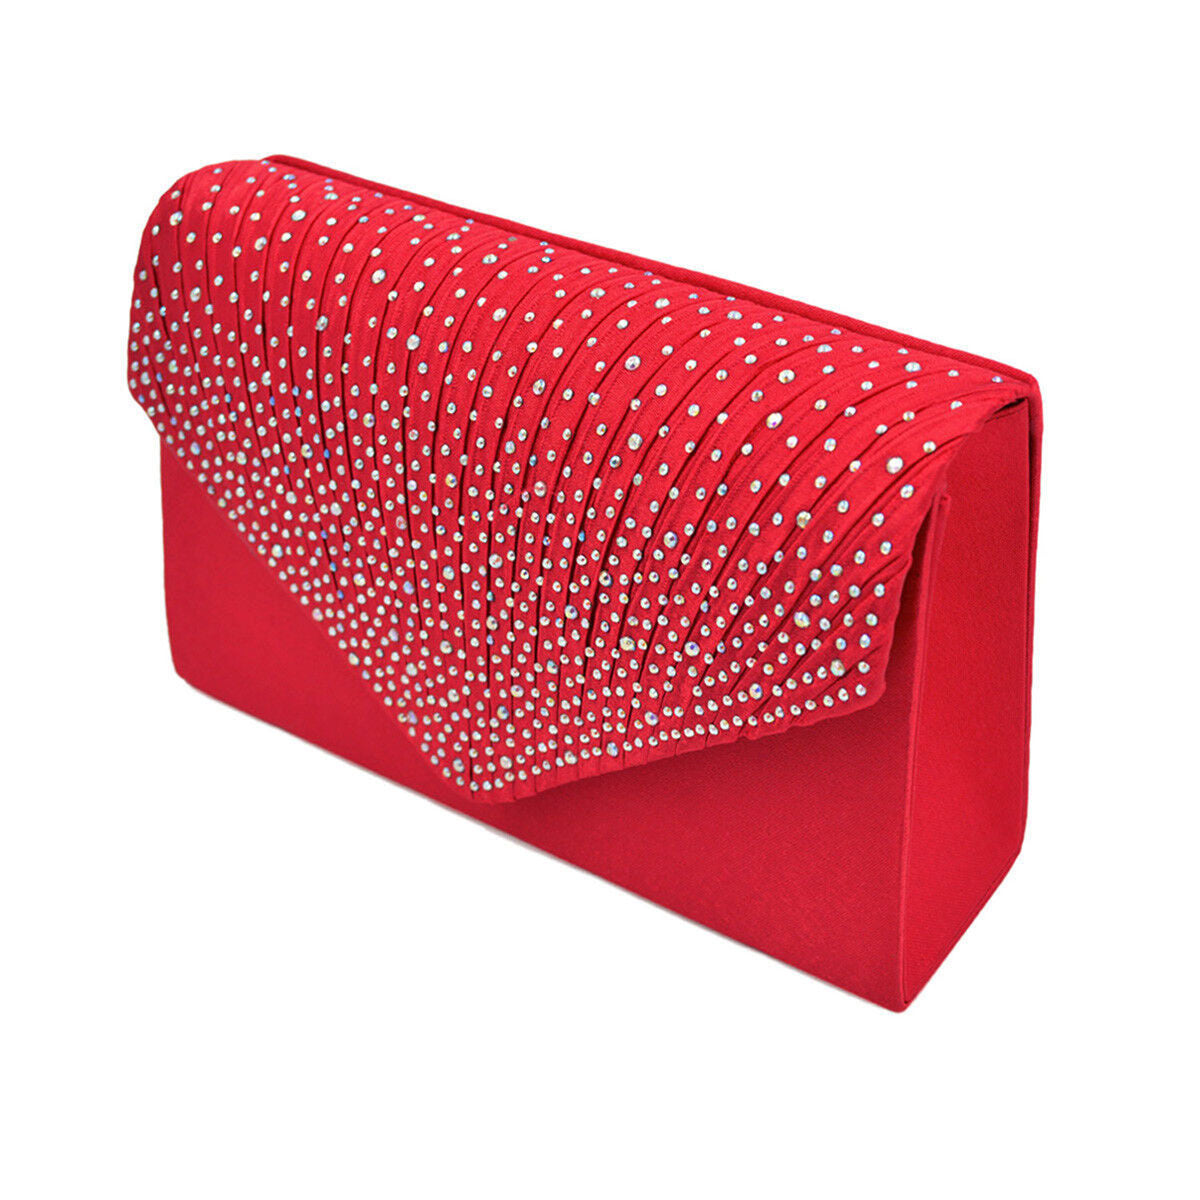 Clutch Red Ruched Rhinestone Bag for Women